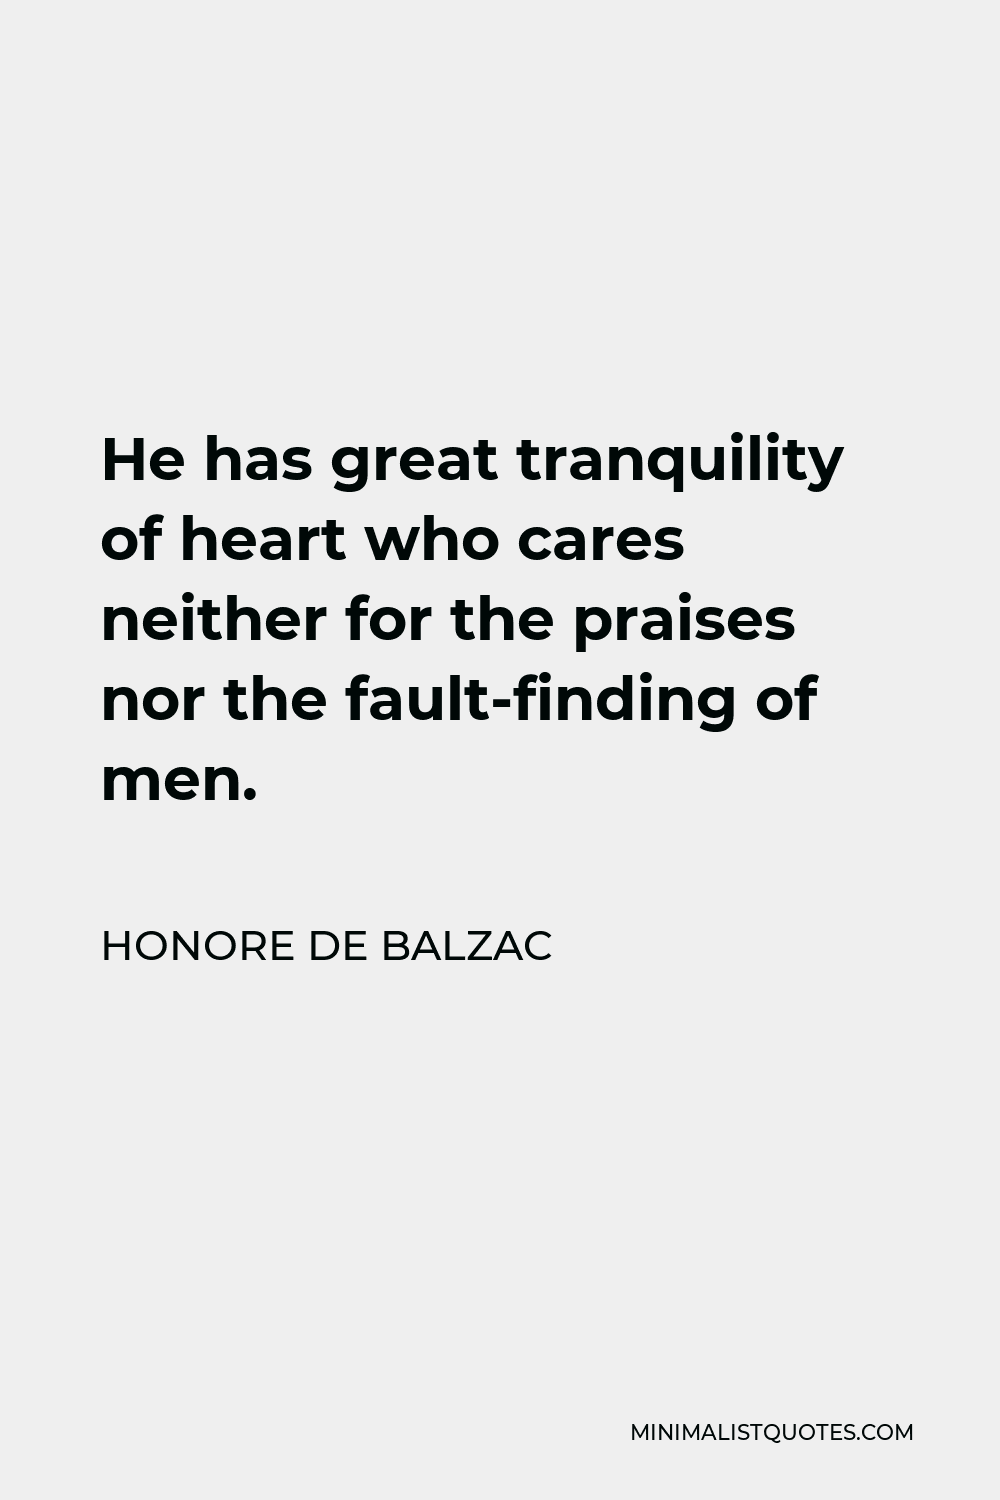 Honore de Balzac Quote - He has great tranquility of heart who cares neither for the praises nor the fault-finding of men.